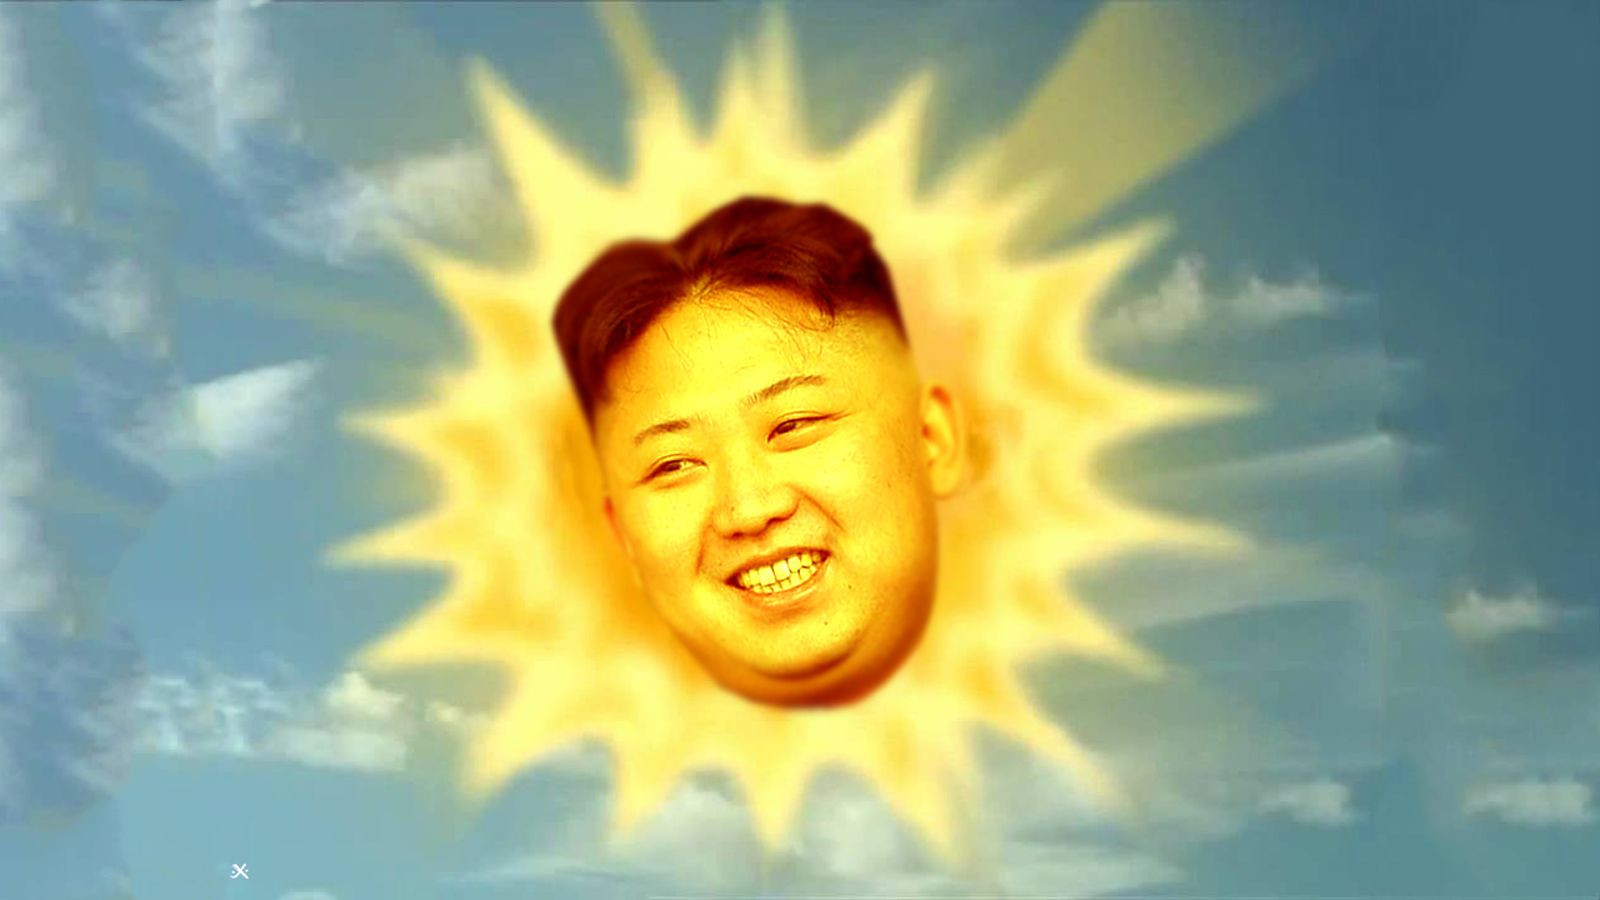 Beautiful Wallpaper of our Glorious Leader! - Imgur